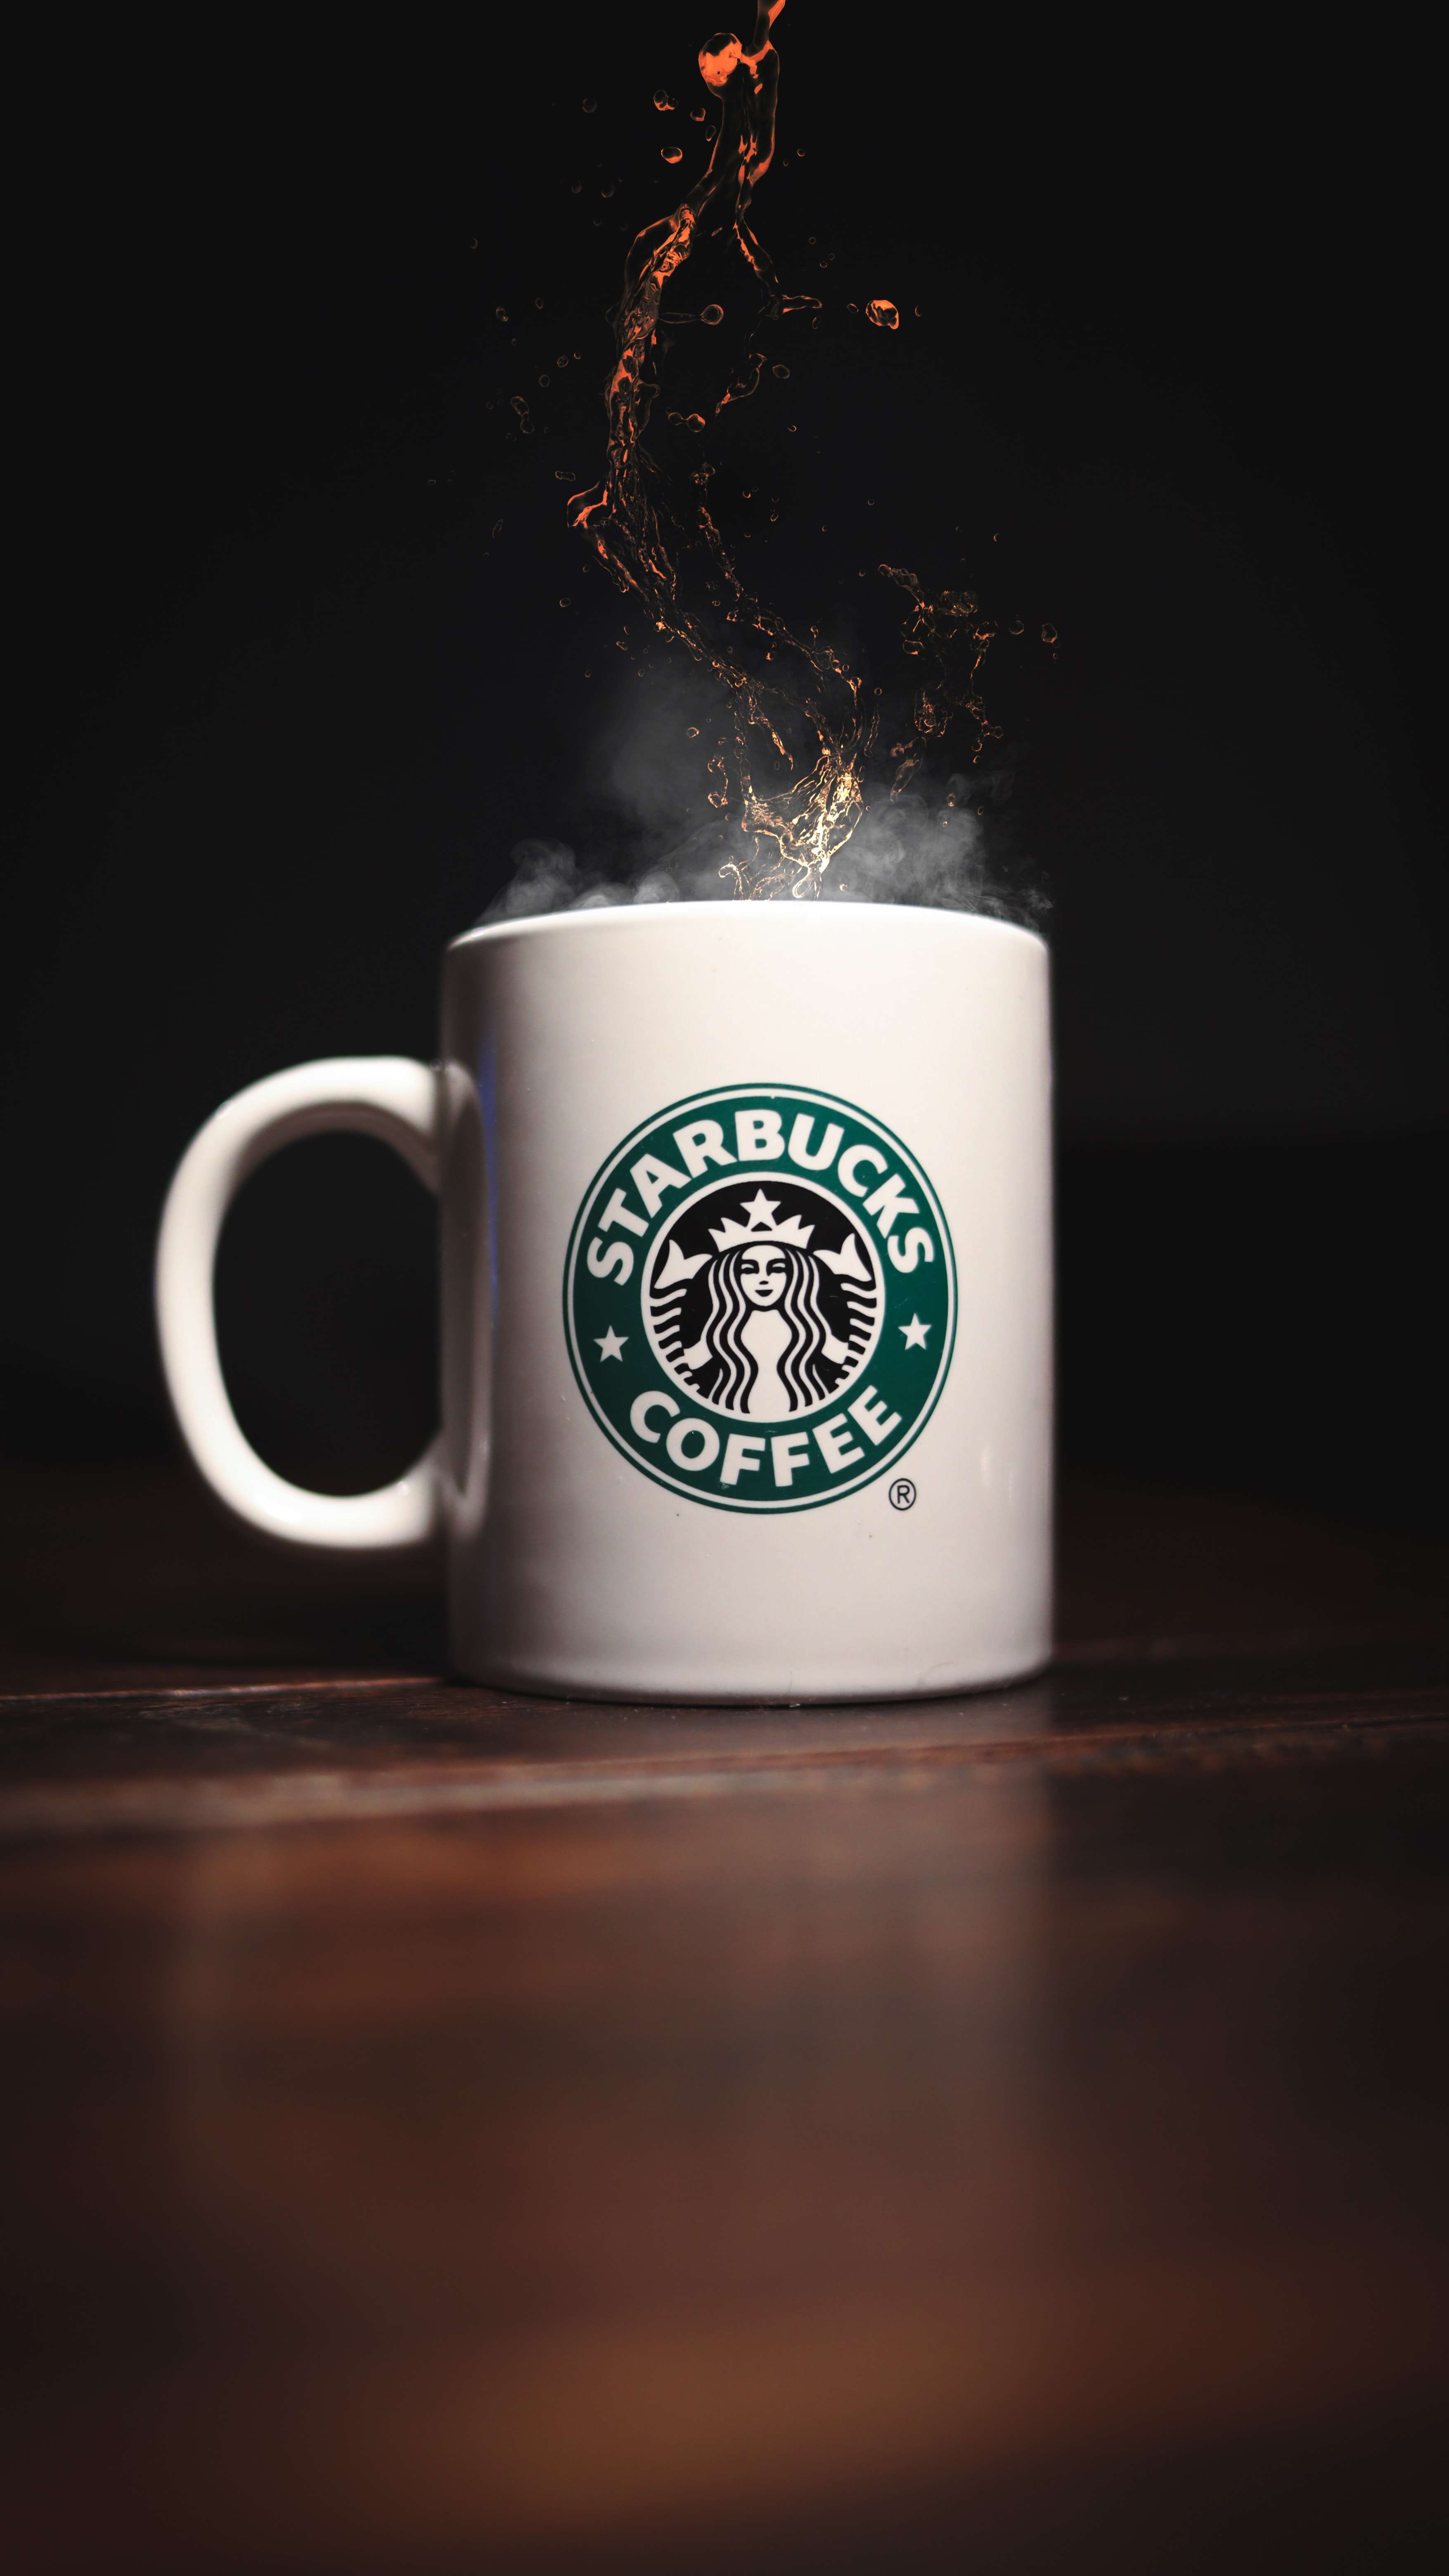 Starbuck coffee cup